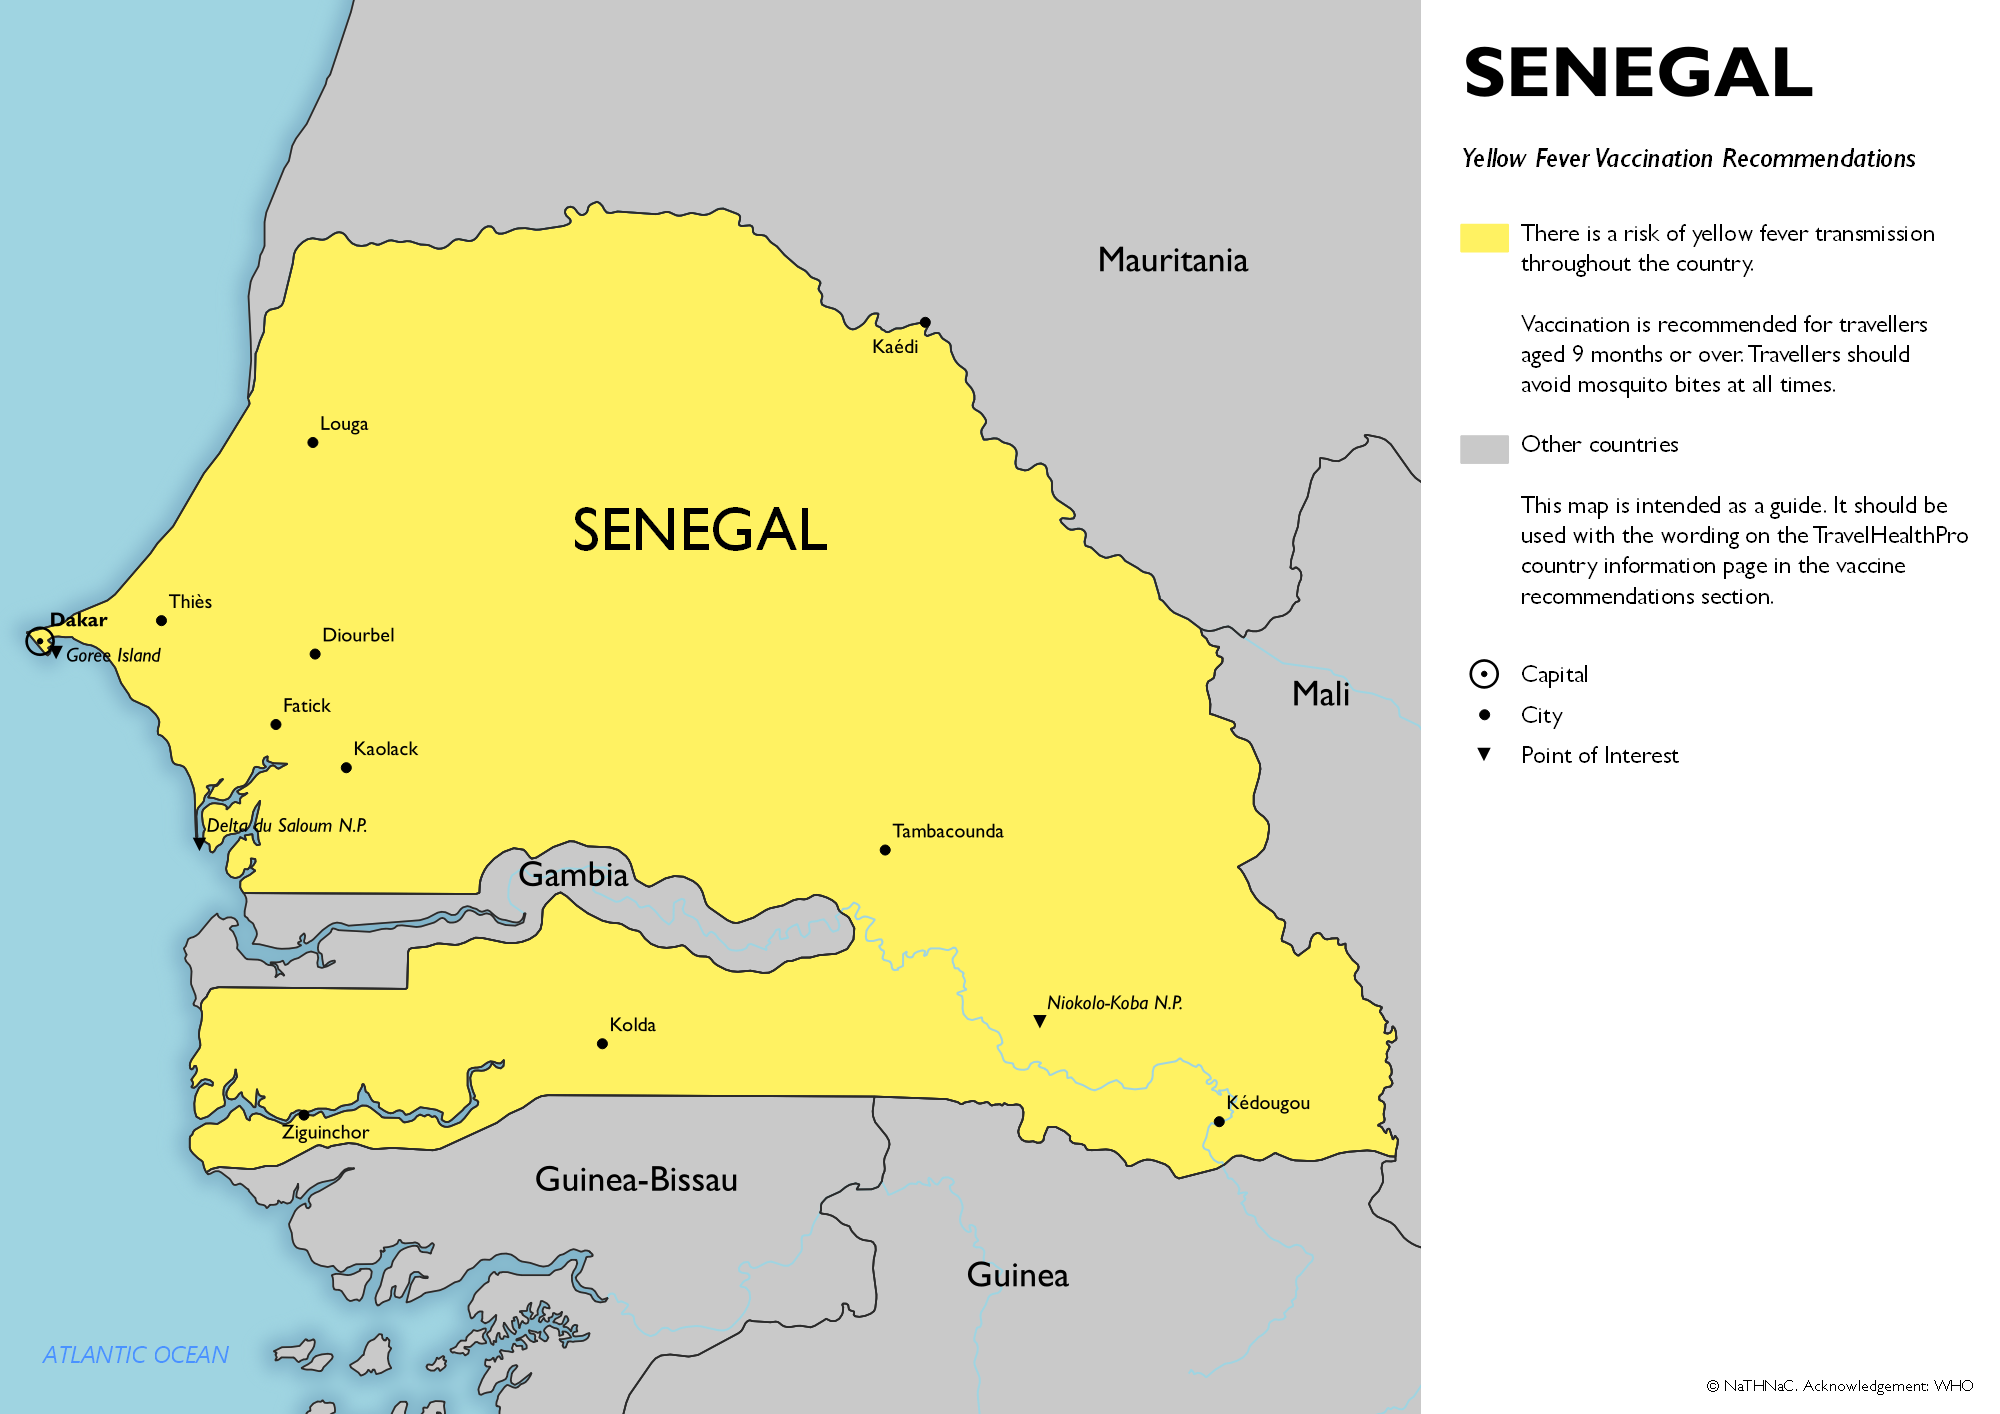 Yellow fever vaccine recommendation map for Senegal